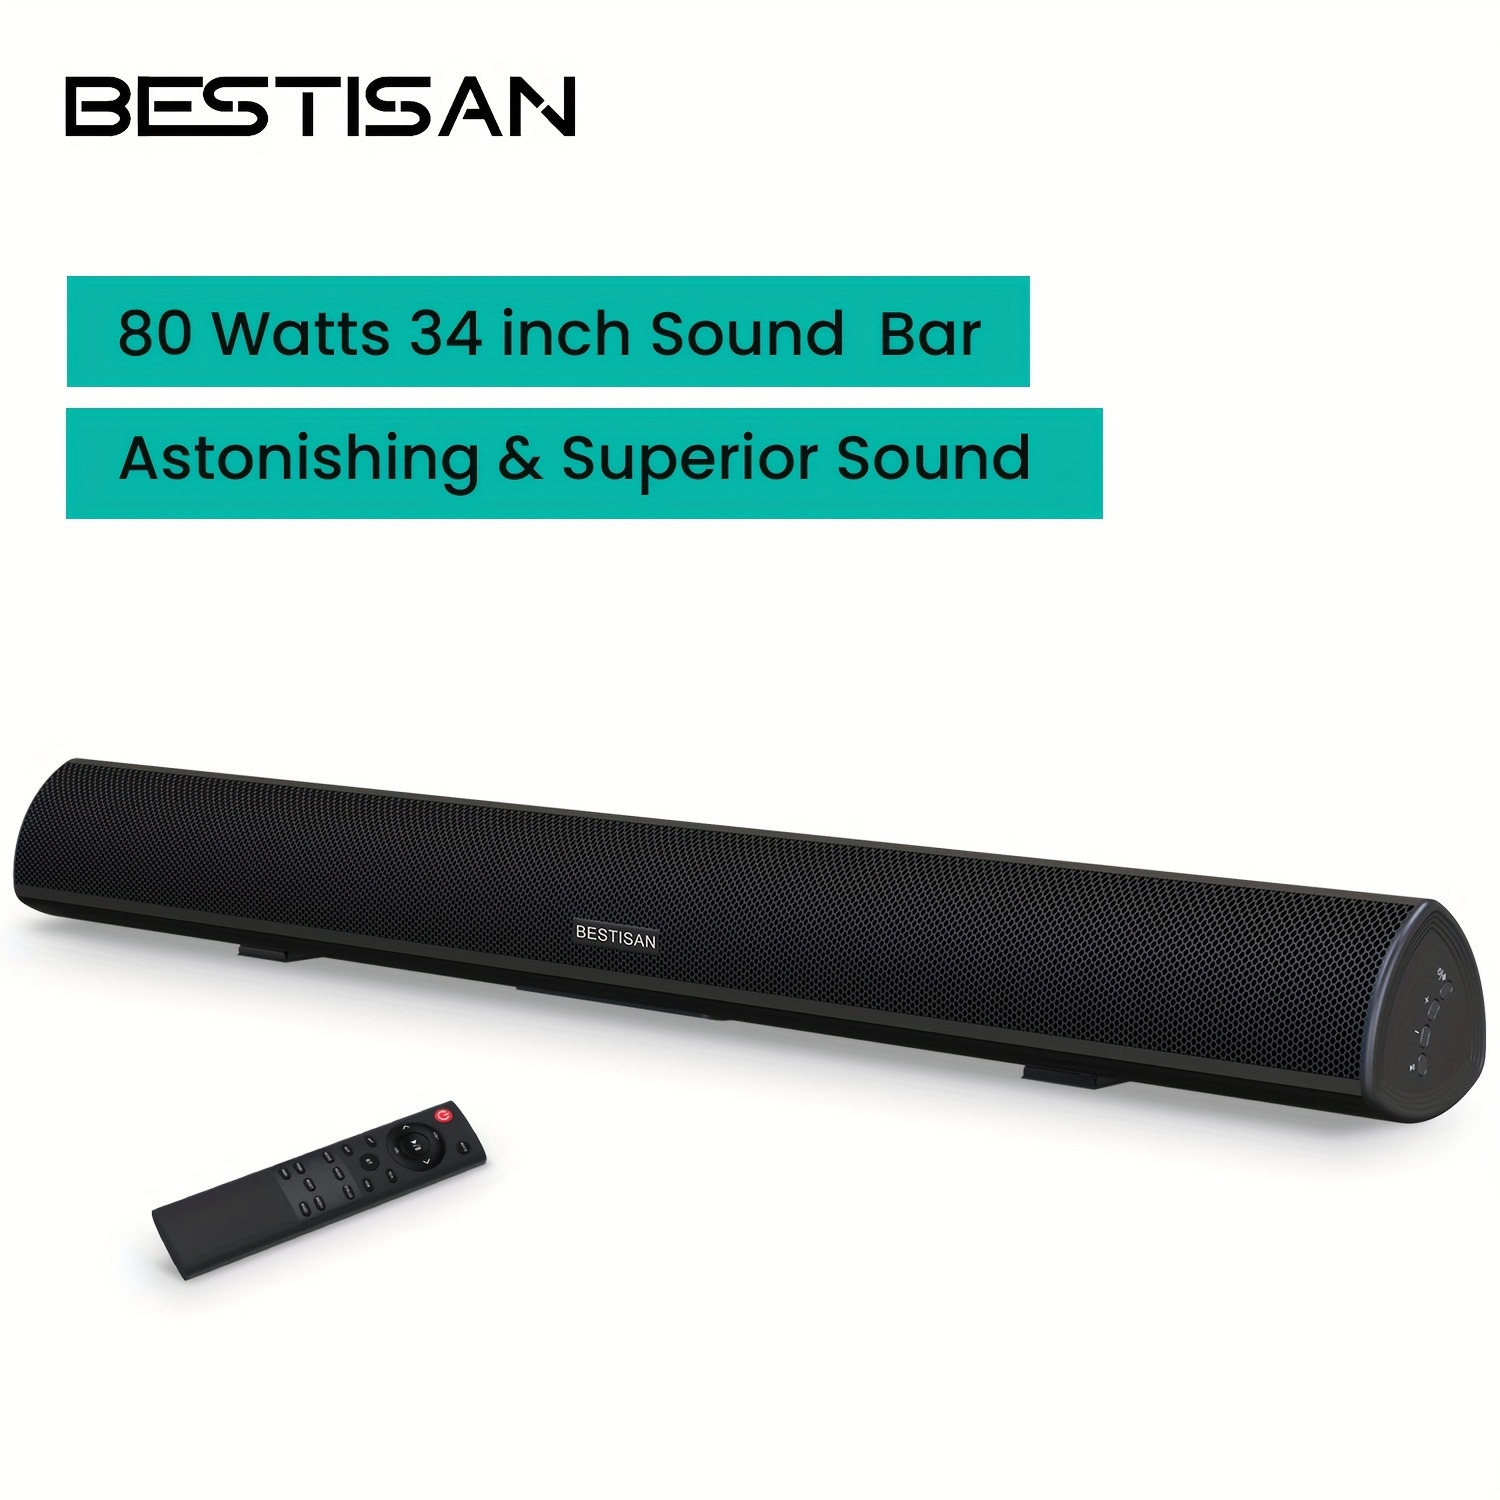 

80 Watts Soundbar, Sound Bars For Tv For Home Theater System (arc, Bt5.0, Aux, Opt, Usb Port To Play Local Music, 34 Inch, Dsp, Strong Bass, Wall Mountable, Bass Adjustable, Aux Output Port)